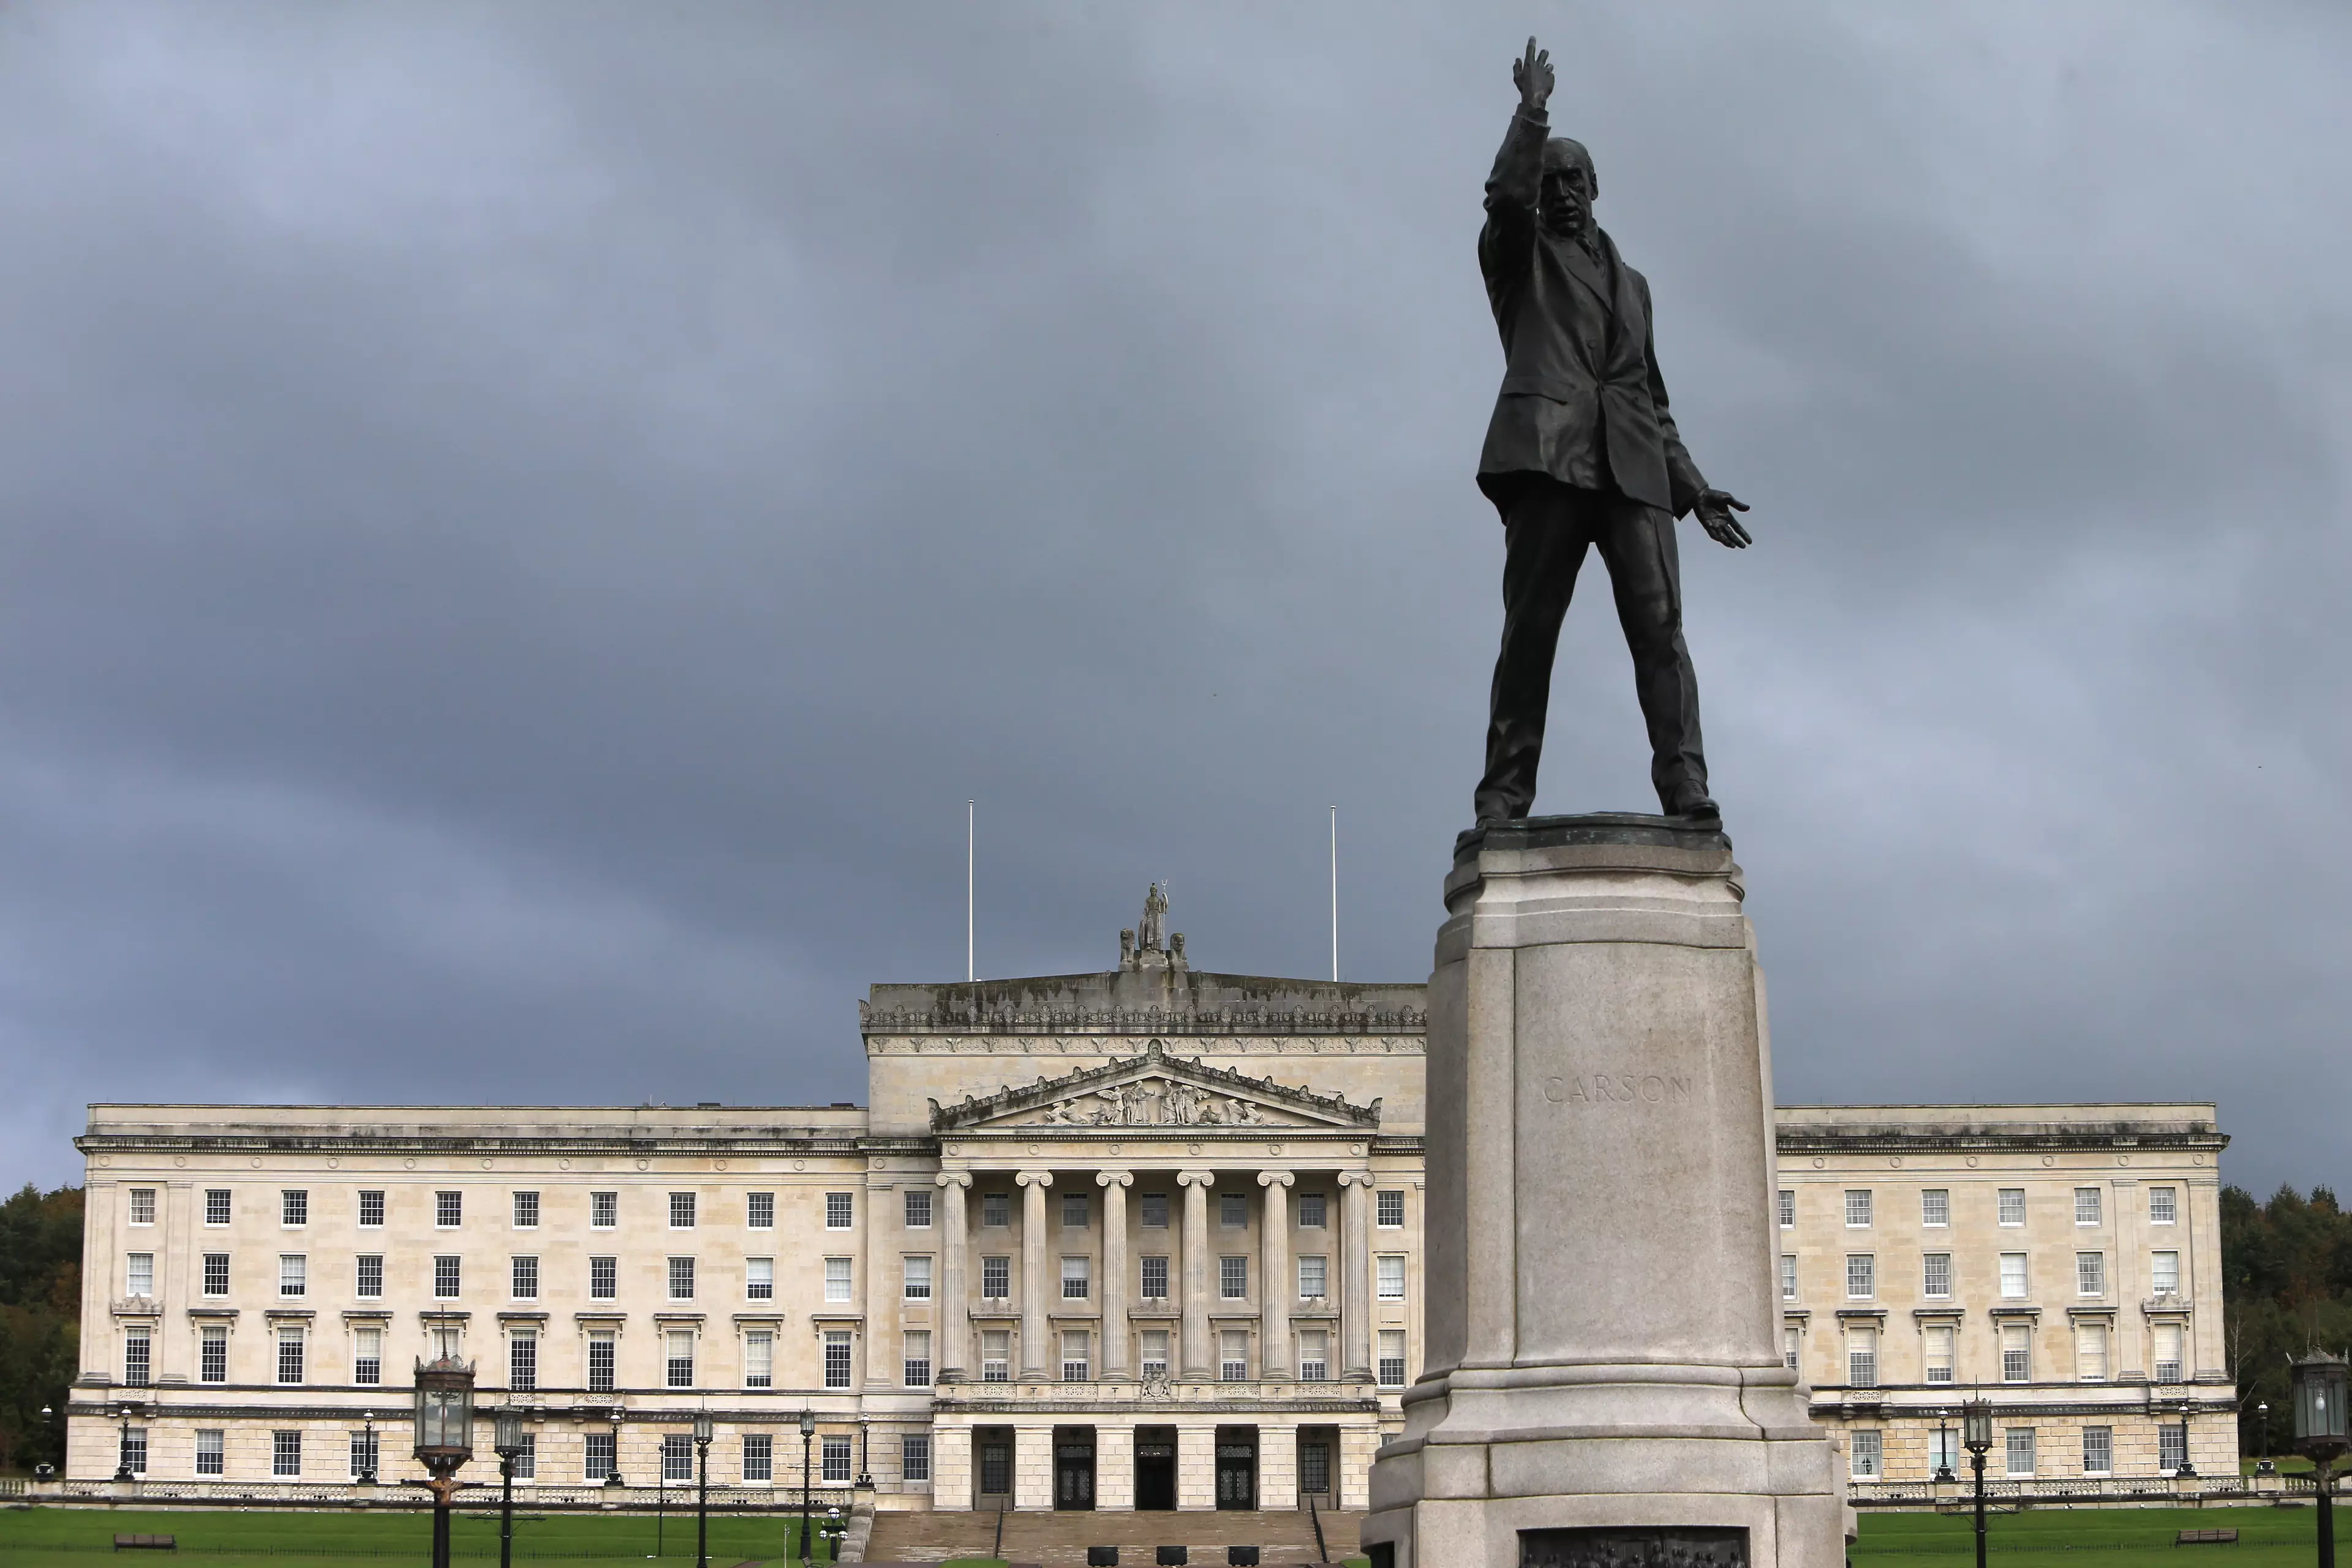 The Northern Ireland Assembly has not sat since 2017.